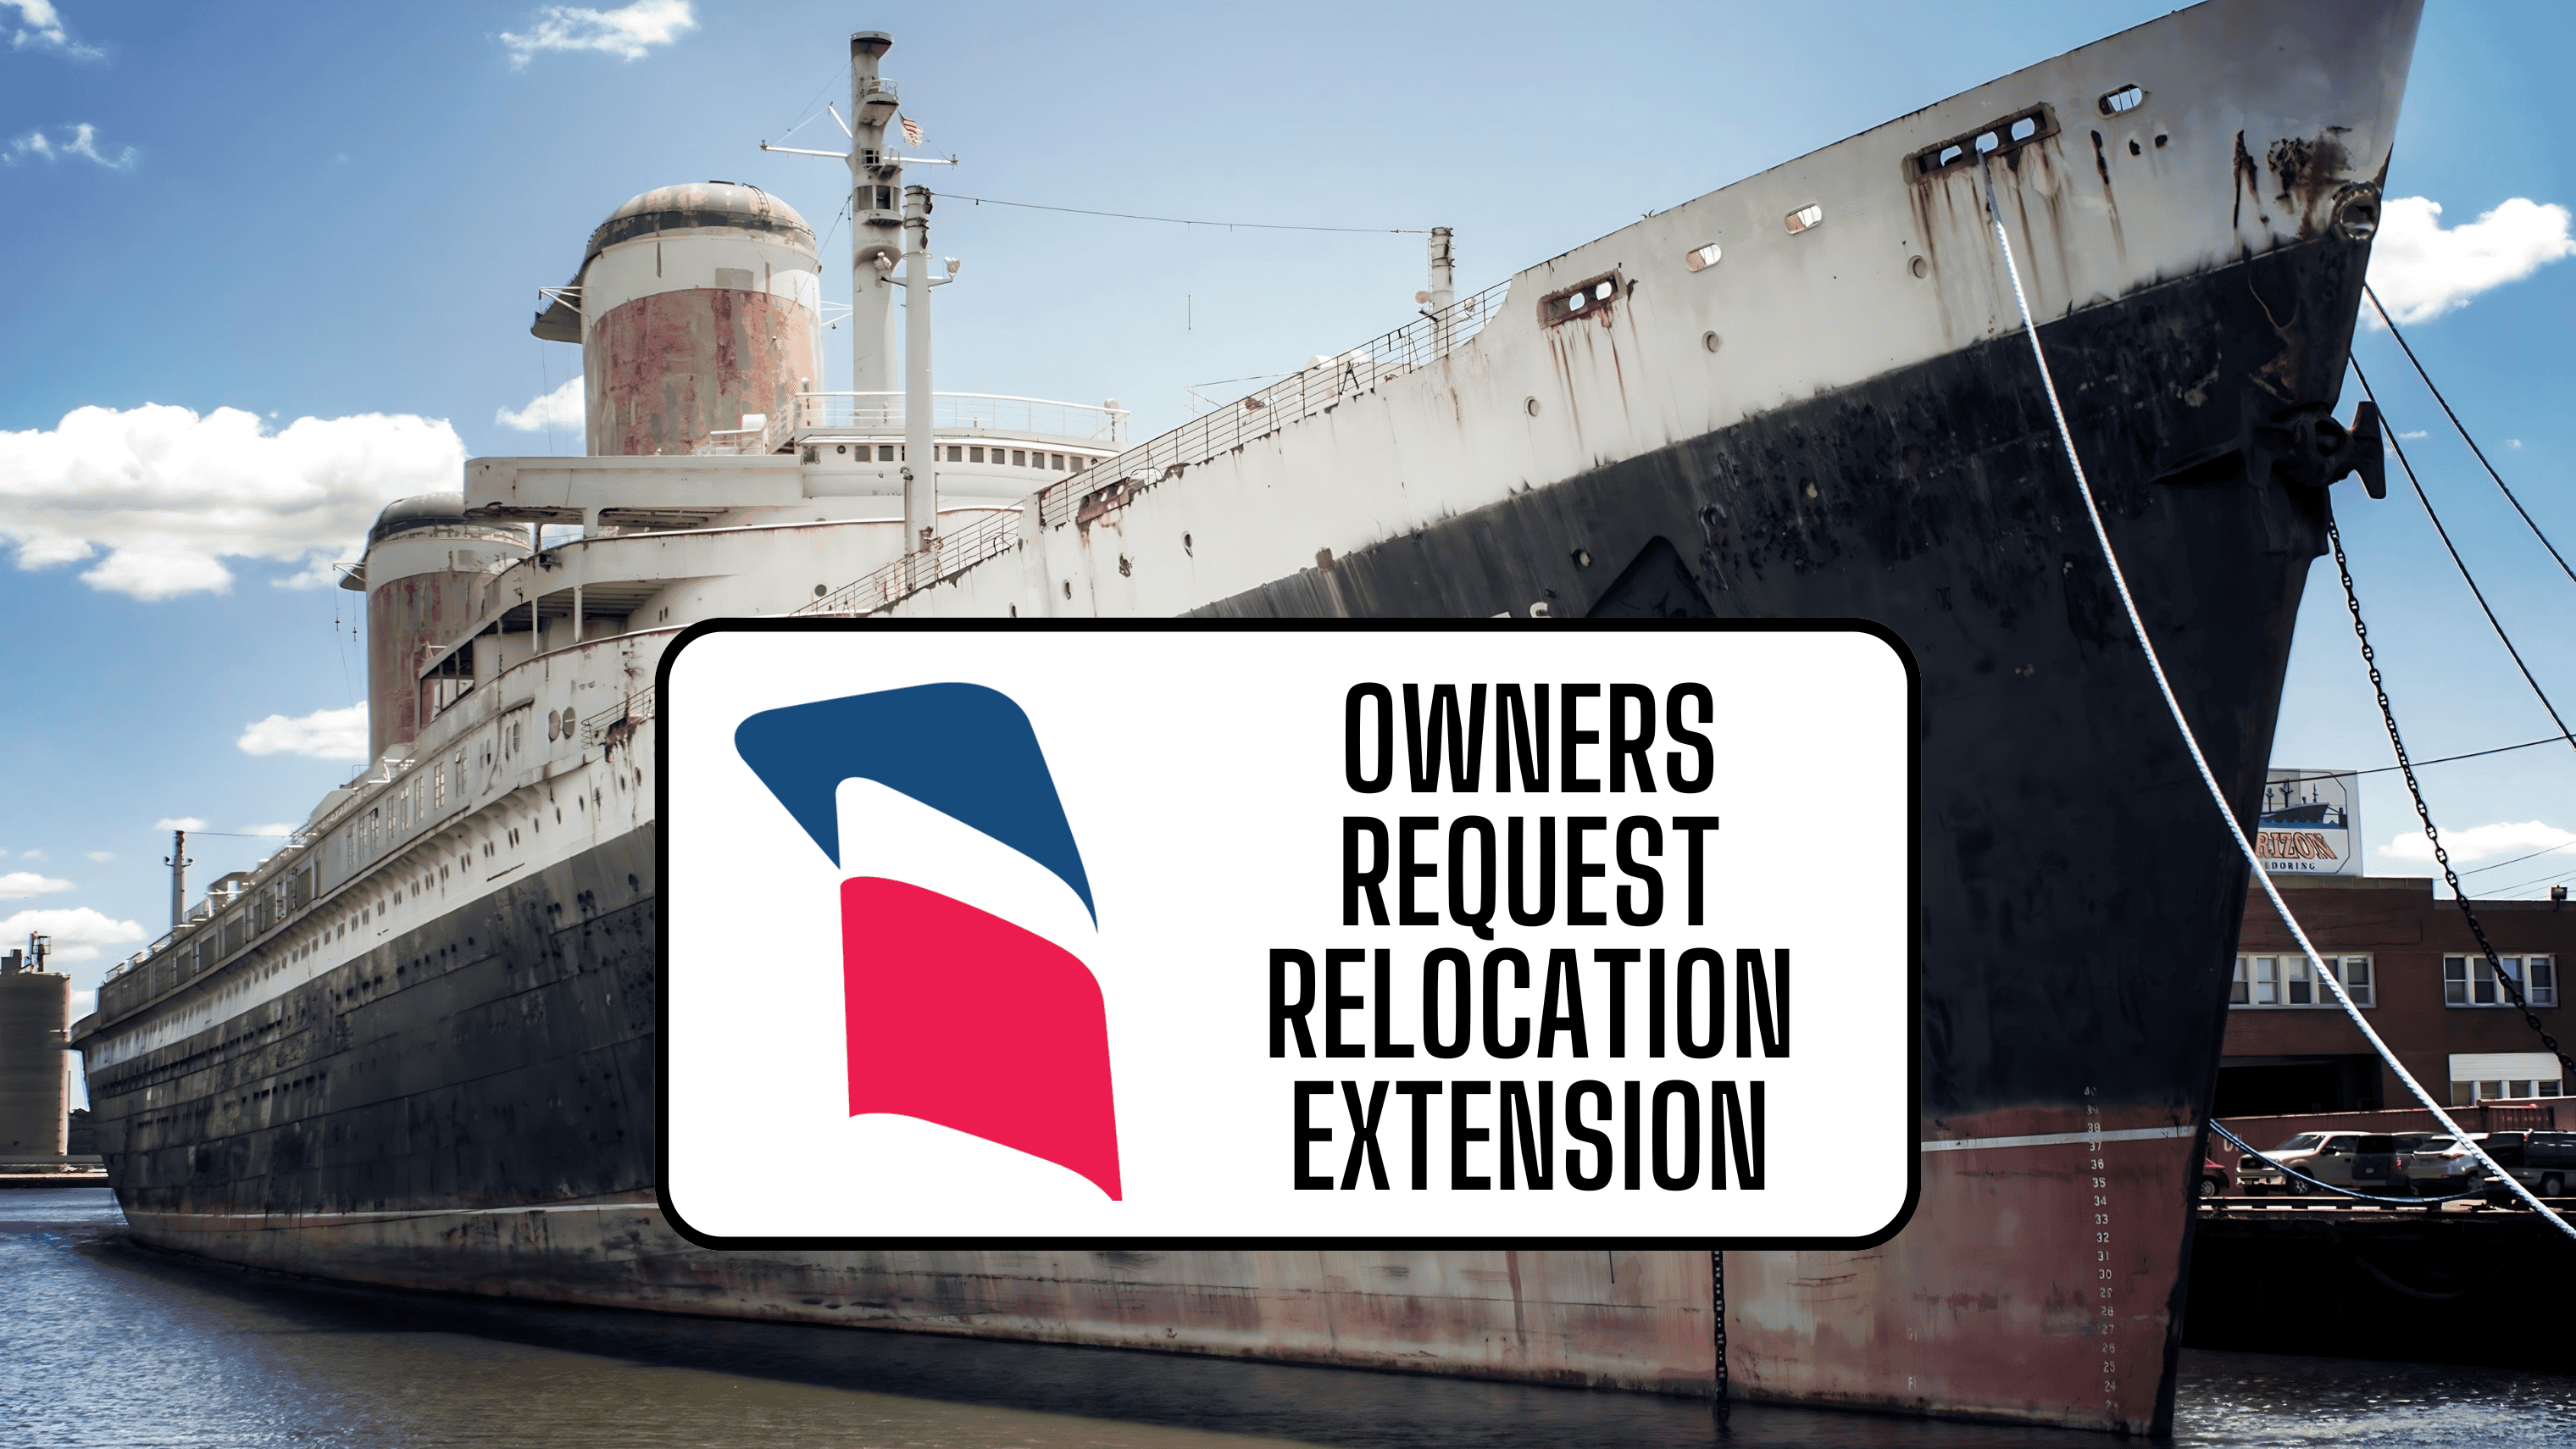 SS United States Conservancy Requests Deadline Extension for Relocating Vessel